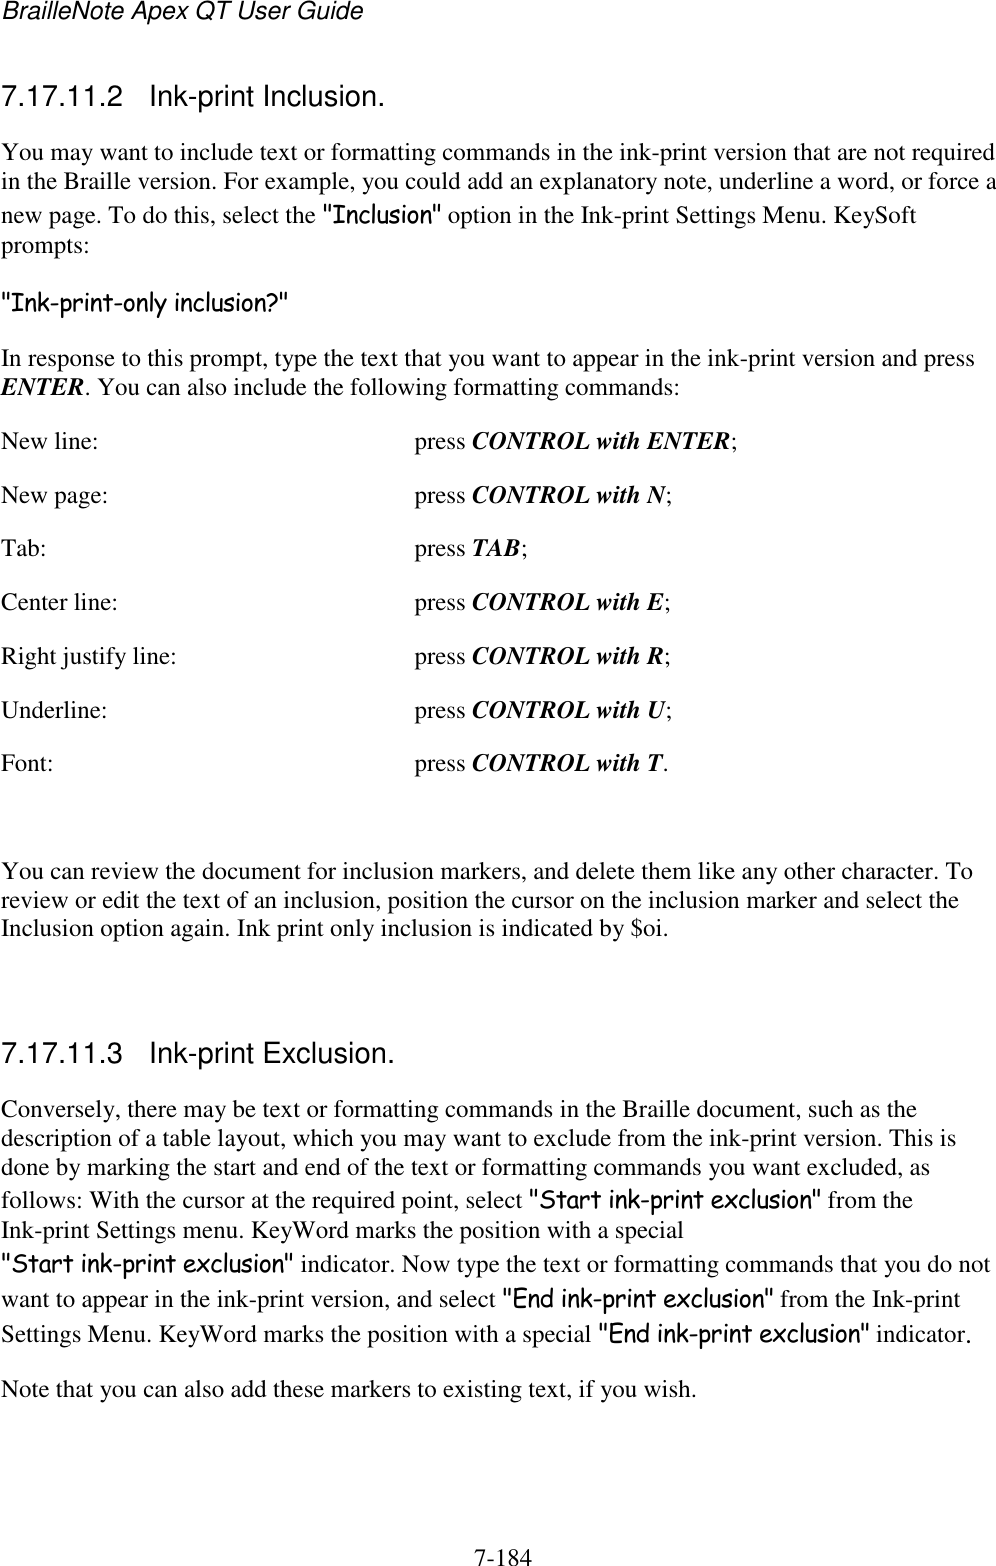 BrailleNote Apex QT User Guide  7-184   7.17.11.2  Ink-print Inclusion. You may want to include text or formatting commands in the ink-print version that are not required in the Braille version. For example, you could add an explanatory note, underline a word, or force a new page. To do this, select the &quot;Inclusion&quot; option in the Ink-print Settings Menu. KeySoft prompts: &quot;Ink-print-only inclusion?&quot; In response to this prompt, type the text that you want to appear in the ink-print version and press ENTER. You can also include the following formatting commands: New line:  press CONTROL with ENTER; New page:  press CONTROL with N; Tab:  press TAB; Center line:  press CONTROL with E; Right justify line:  press CONTROL with R; Underline:  press CONTROL with U; Font:  press CONTROL with T.  You can review the document for inclusion markers, and delete them like any other character. To review or edit the text of an inclusion, position the cursor on the inclusion marker and select the Inclusion option again. Ink print only inclusion is indicated by $oi.   7.17.11.3  Ink-print Exclusion. Conversely, there may be text or formatting commands in the Braille document, such as the description of a table layout, which you may want to exclude from the ink-print version. This is done by marking the start and end of the text or formatting commands you want excluded, as follows: With the cursor at the required point, select &quot;Start ink-print exclusion&quot; from the Ink-print Settings menu. KeyWord marks the position with a special &quot;Start ink-print exclusion&quot; indicator. Now type the text or formatting commands that you do not want to appear in the ink-print version, and select &quot;End ink-print exclusion&quot; from the Ink-print Settings Menu. KeyWord marks the position with a special &quot;End ink-print exclusion&quot; indicator. Note that you can also add these markers to existing text, if you wish.   